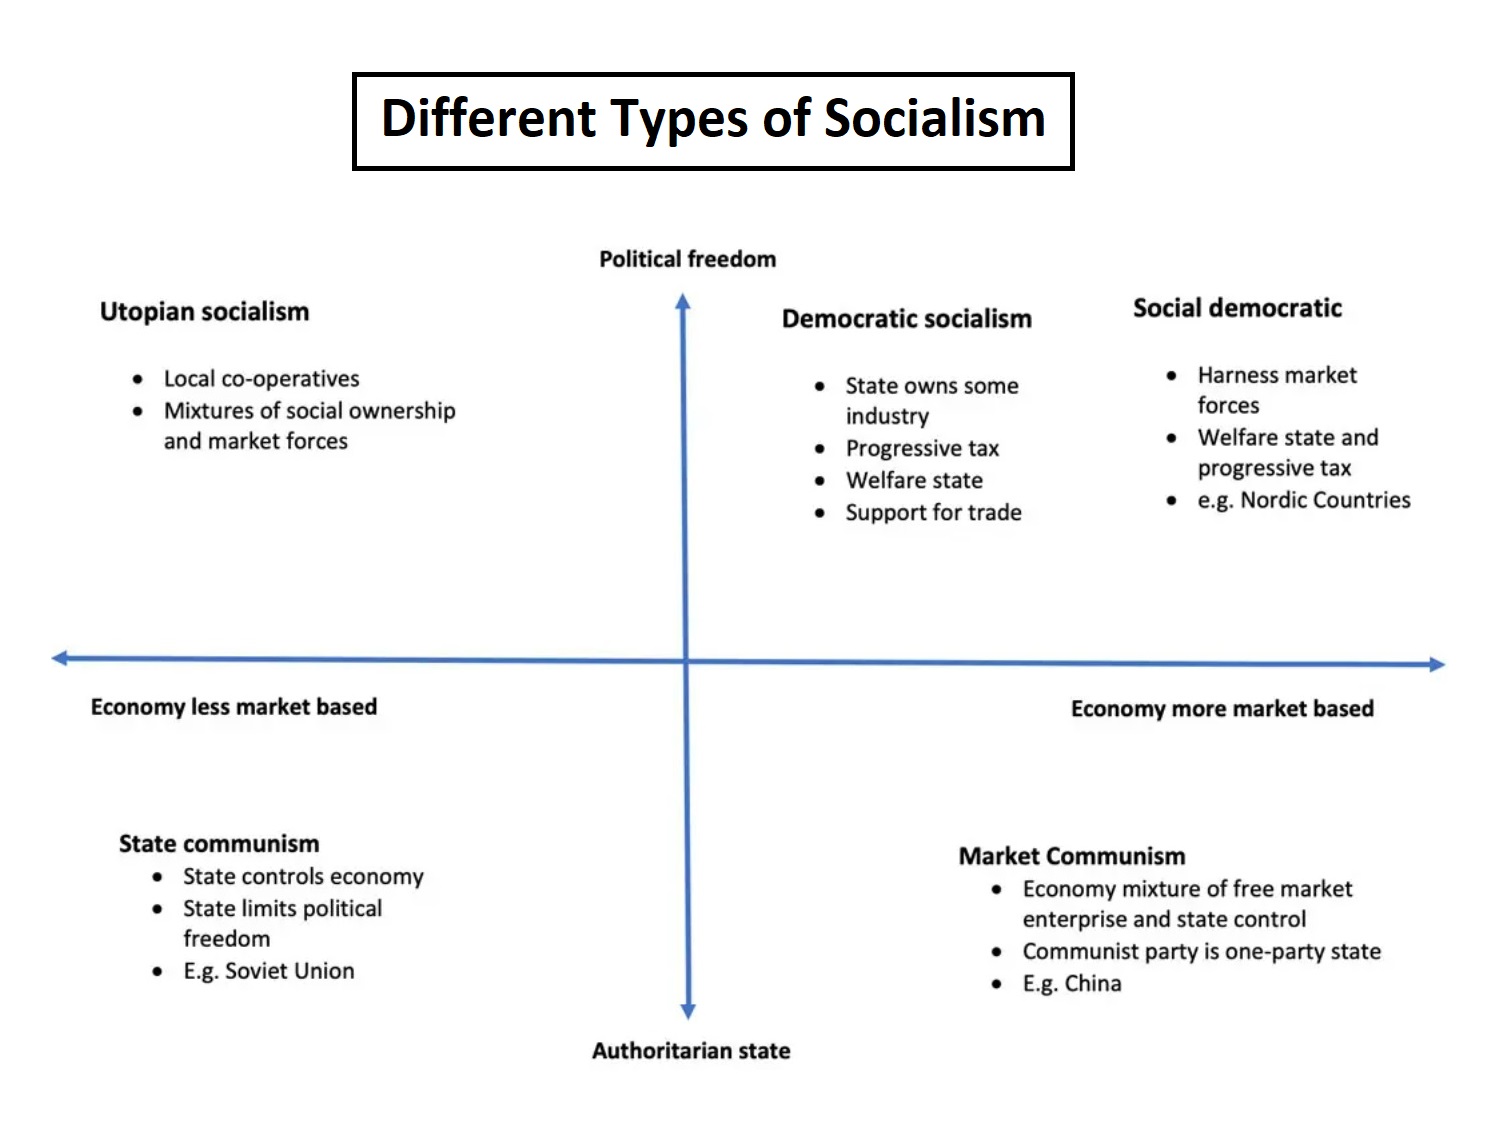 Different types of socialism